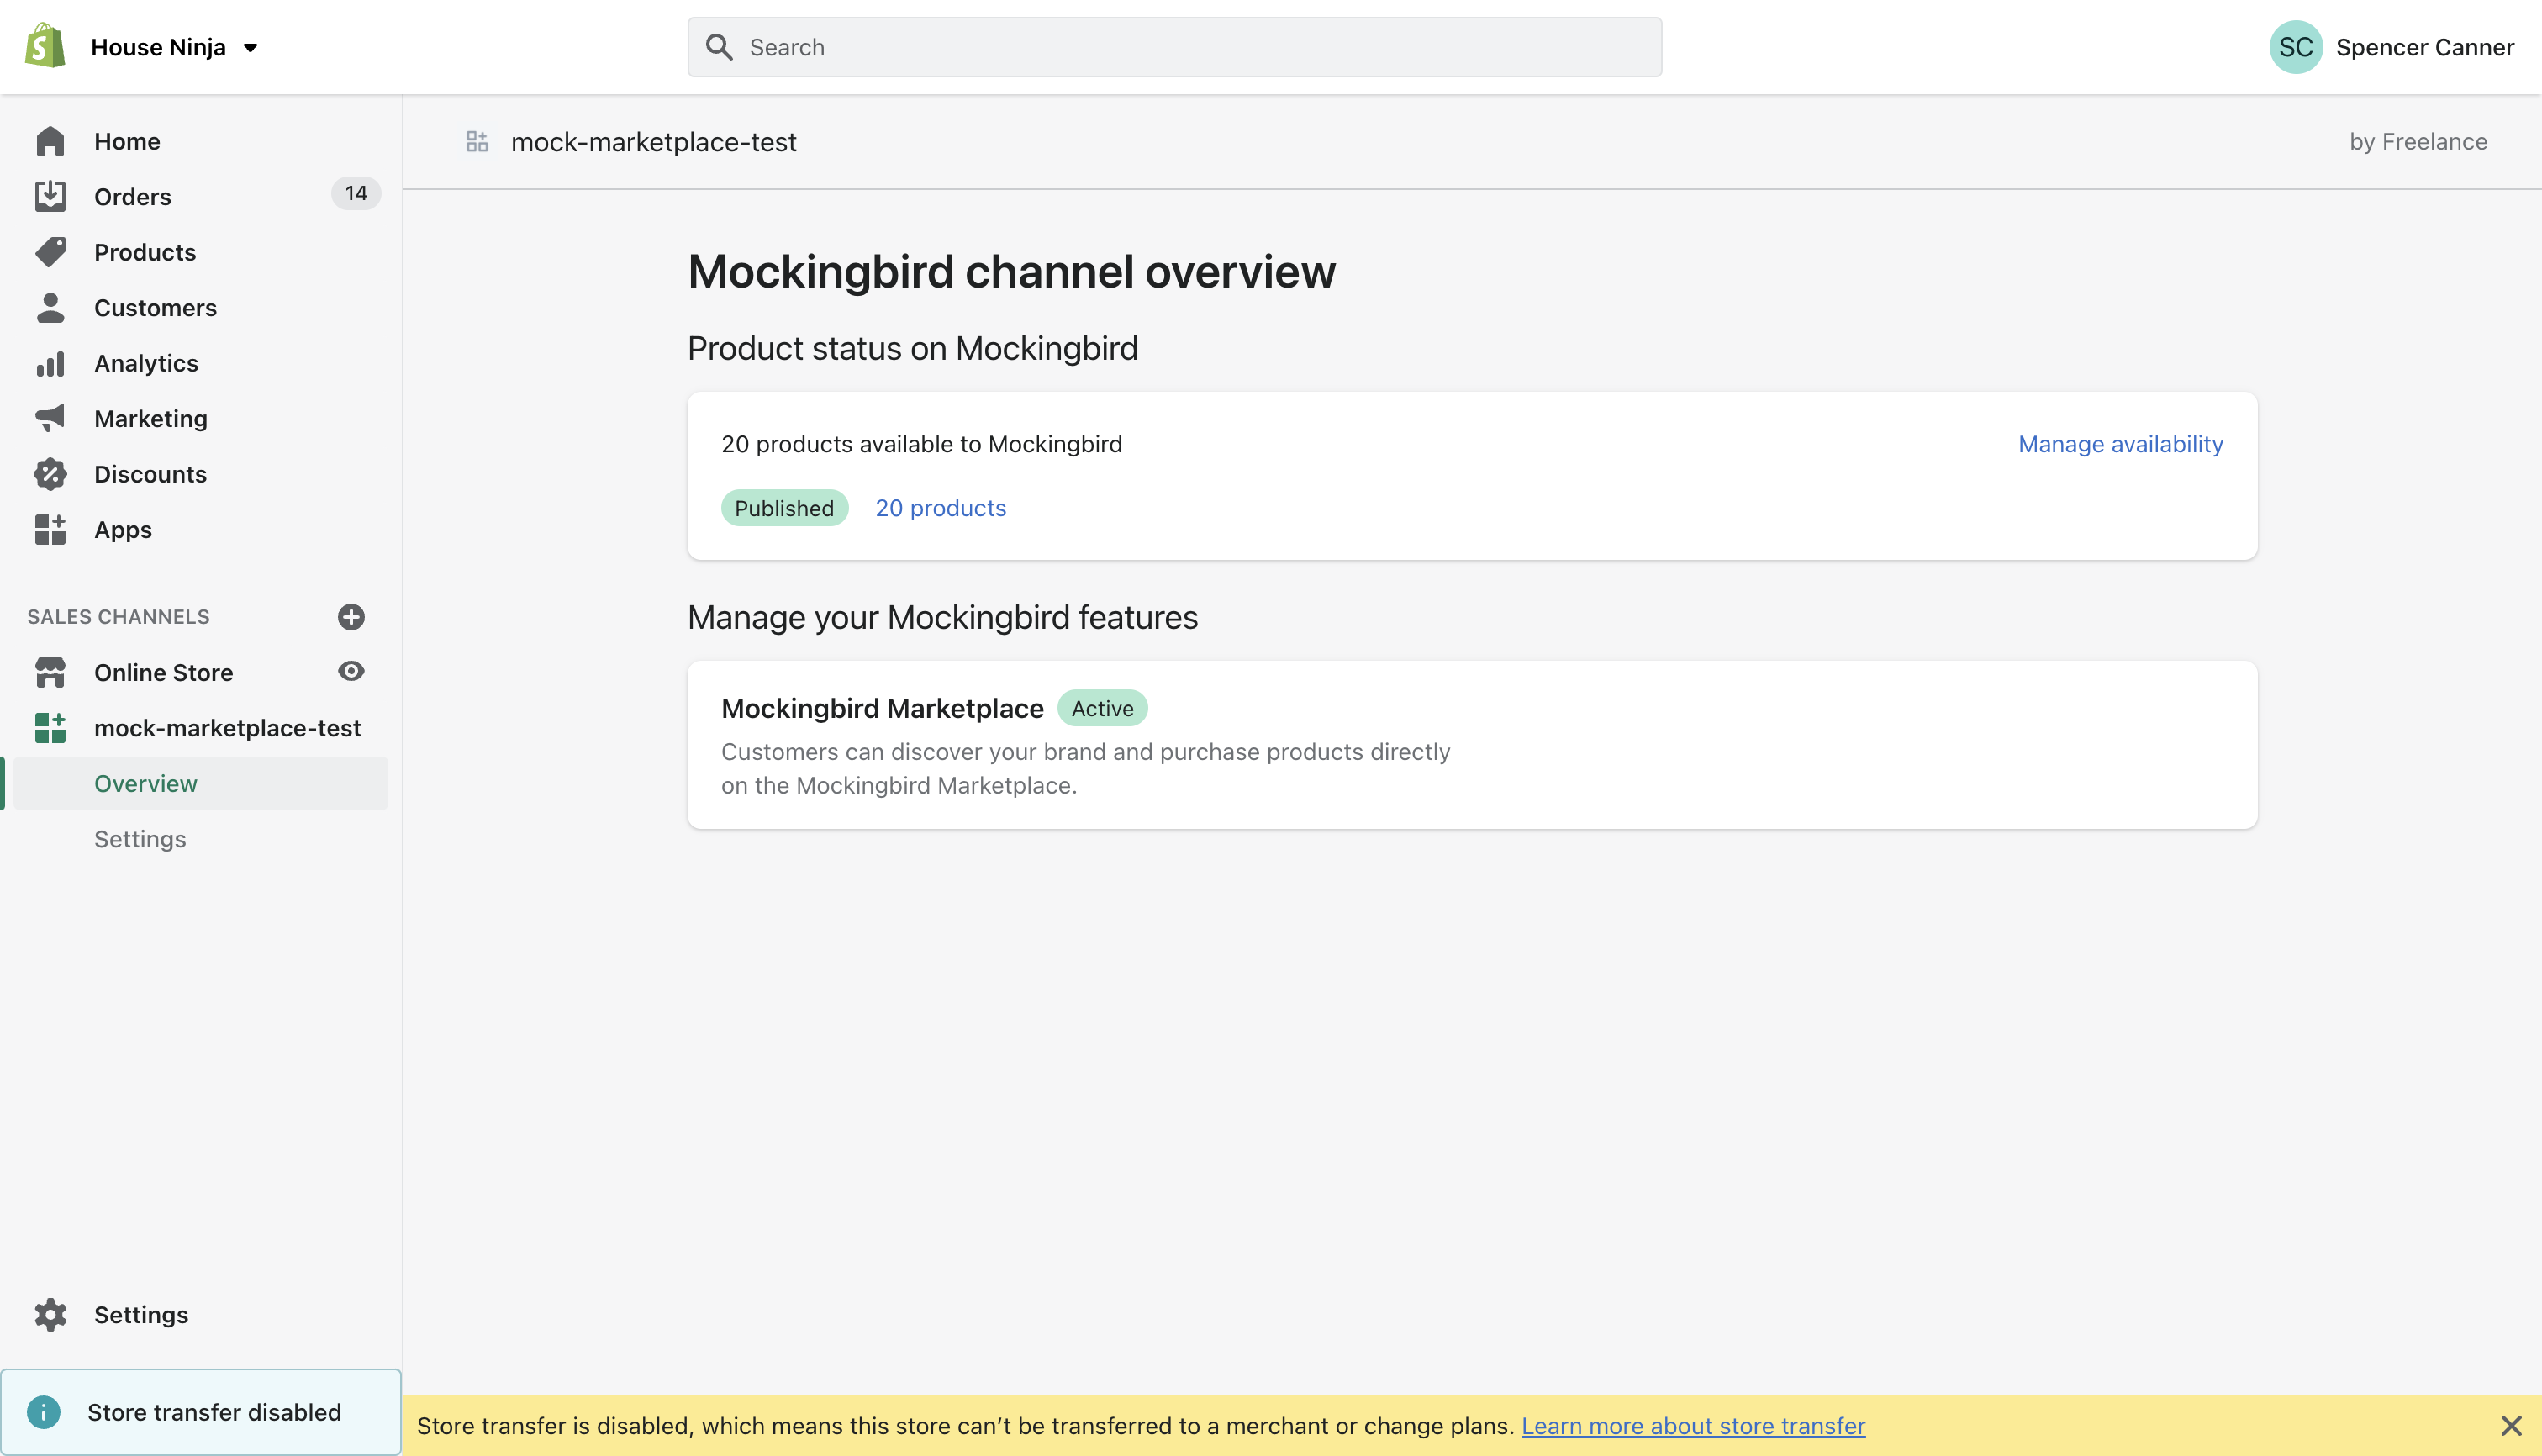 An image of the channel app introduction page